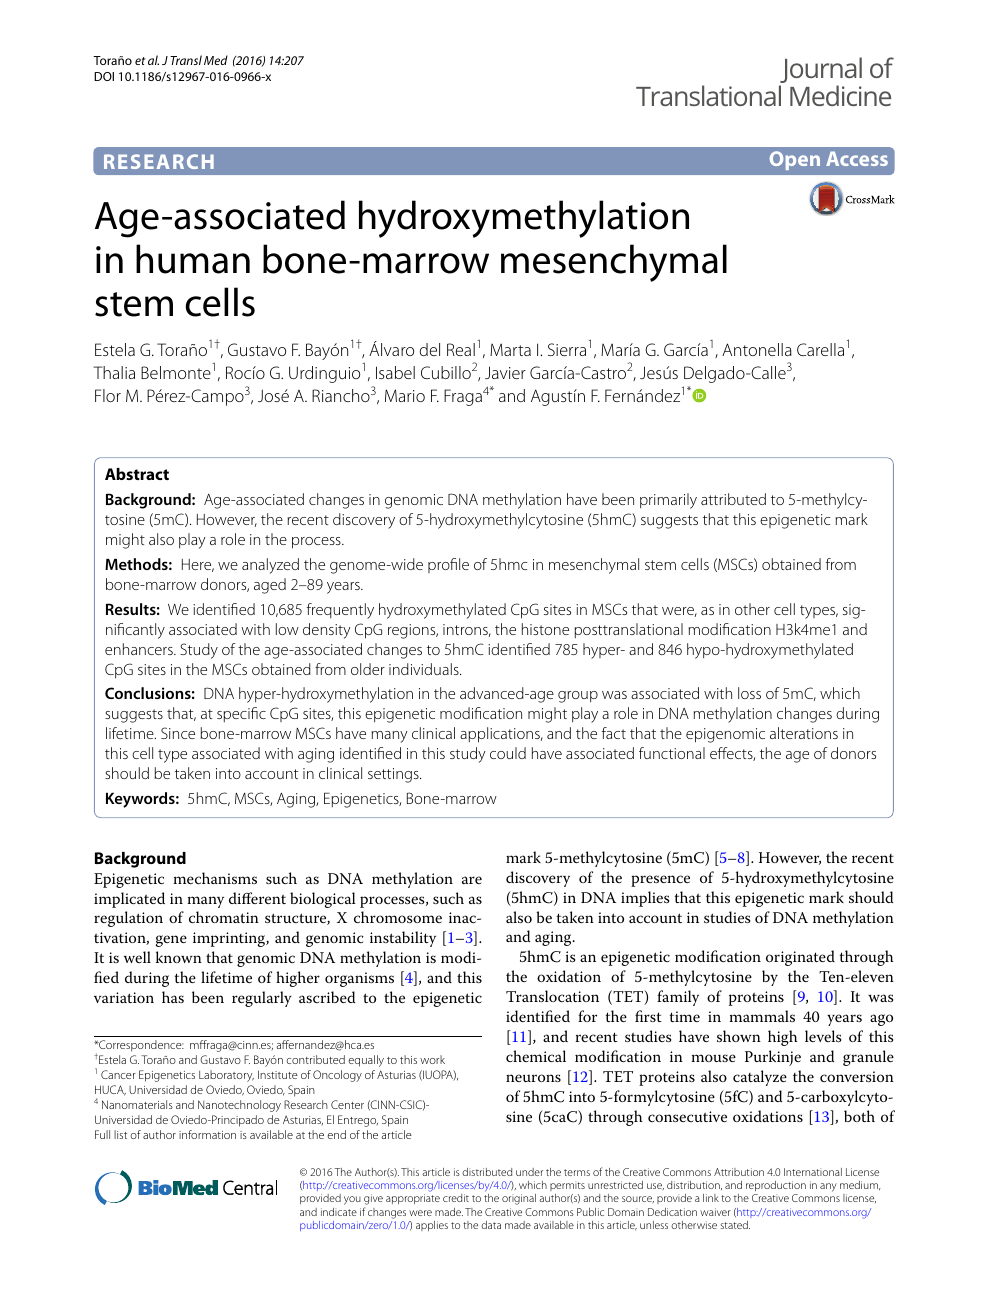 Age Associated Hydroxymethylation In Human Bone Marrow Mesenchymal Stem Cells Topic Of Research Paper In Clinical Medicine Download Scholarly Article Pdf And Read For Free On Cyberleninka Open Science Hub